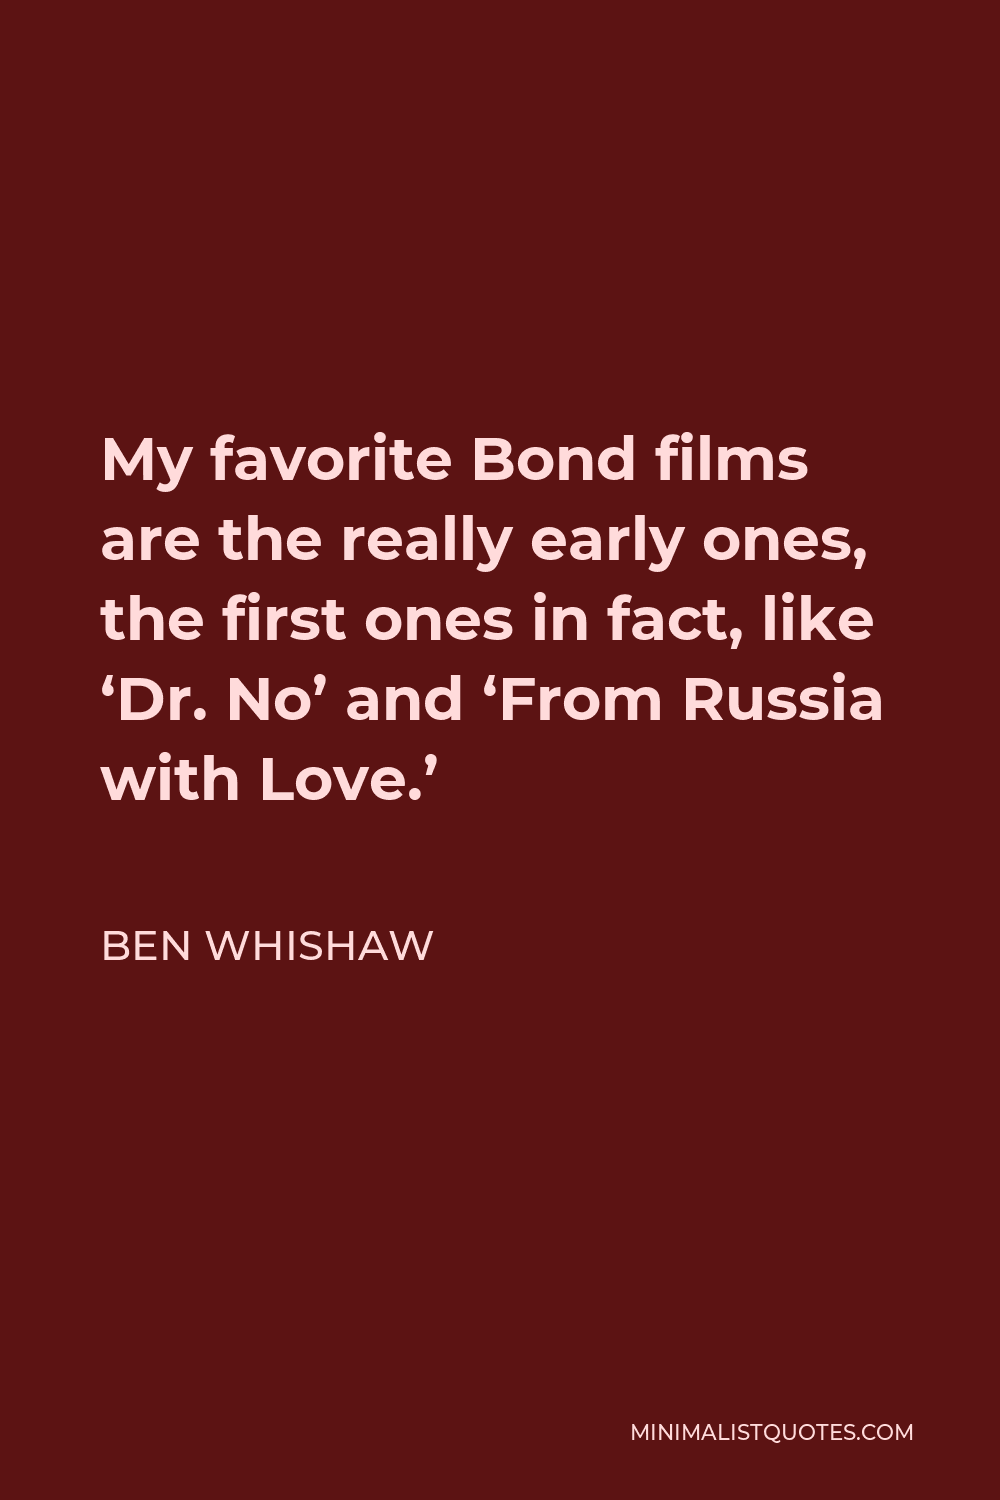 Ben Whishaw Quote - My favorite Bond films are the really early ones, the first ones in fact, like ‘Dr. No’ and ‘From Russia with Love.’